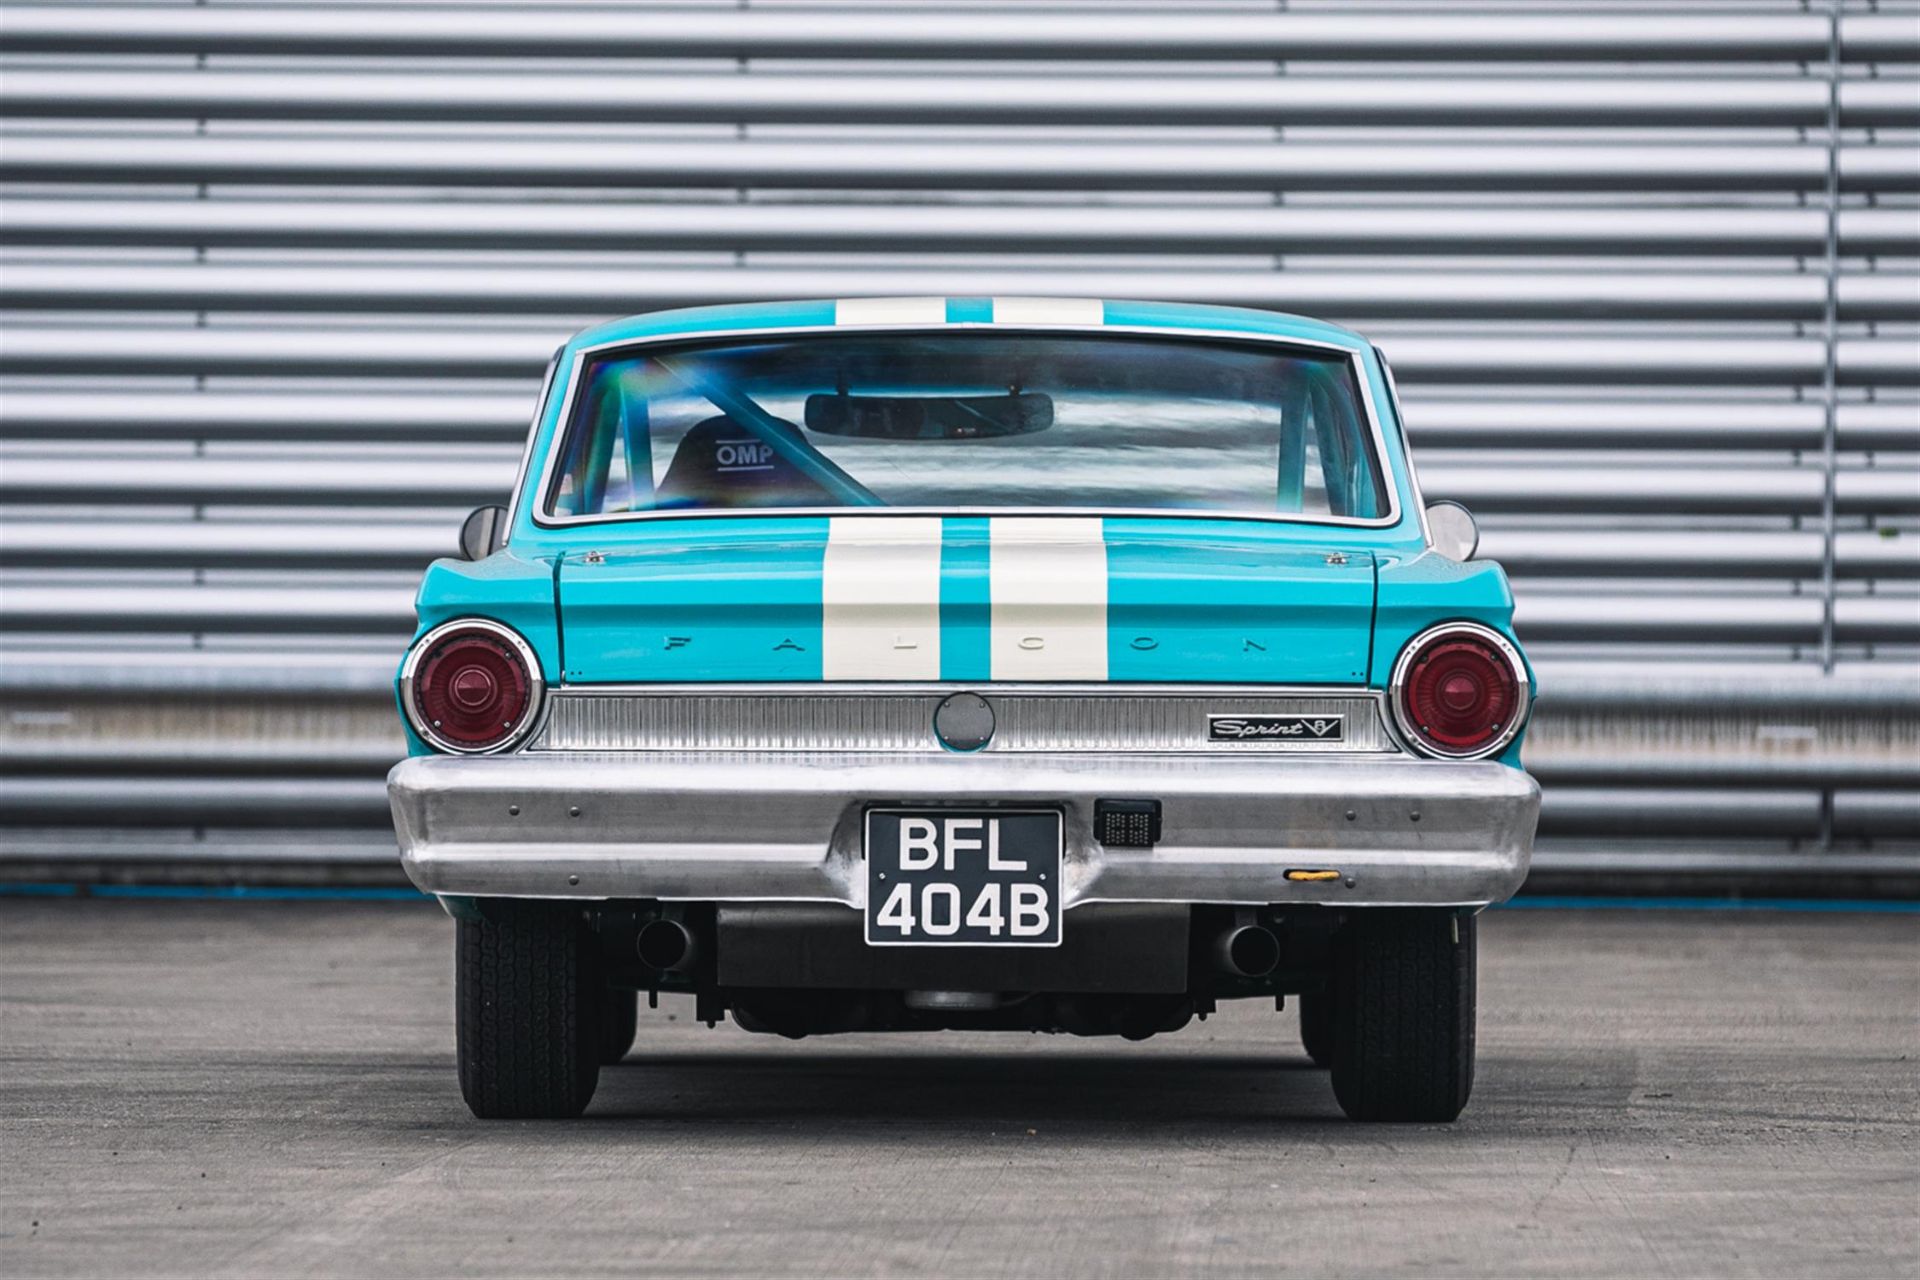 1964 Ford Falcon FIA Race car offered directly from Rowan Atkinson CBE - Image 7 of 10